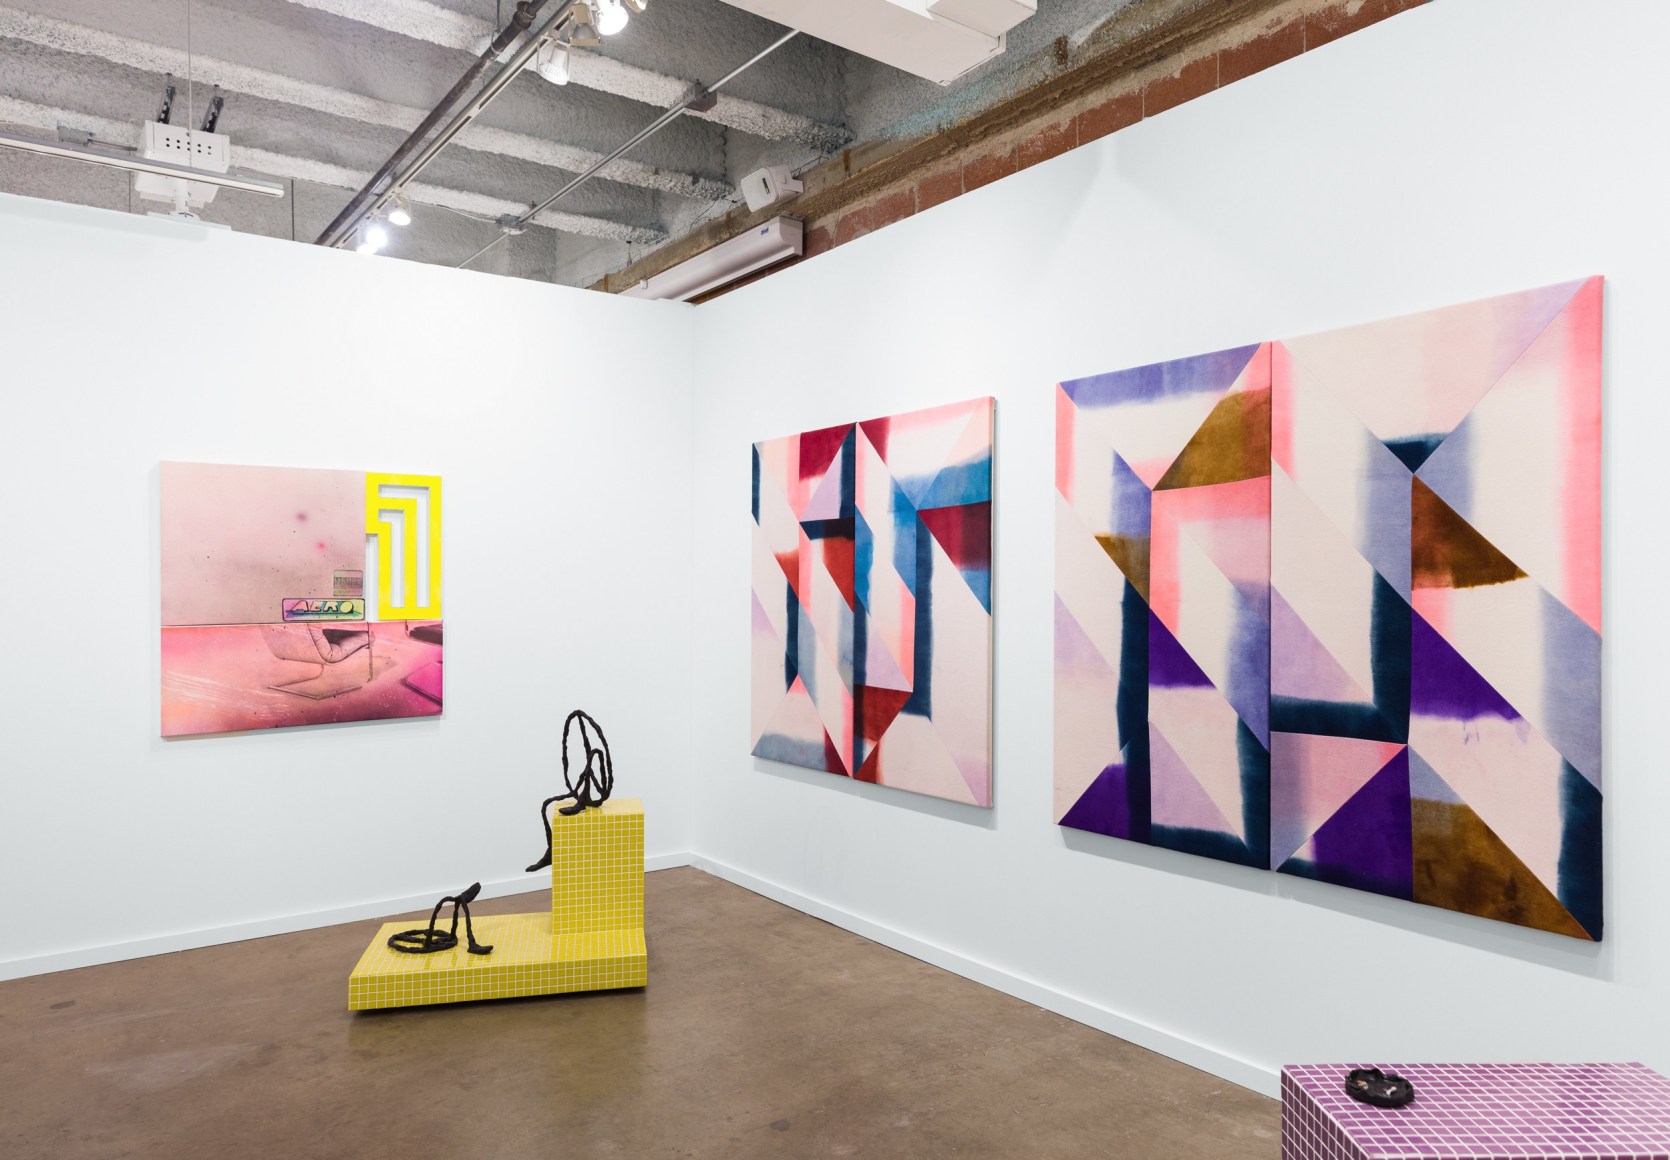 Everything You Need to Know about the 2023 Dallas Art Fair